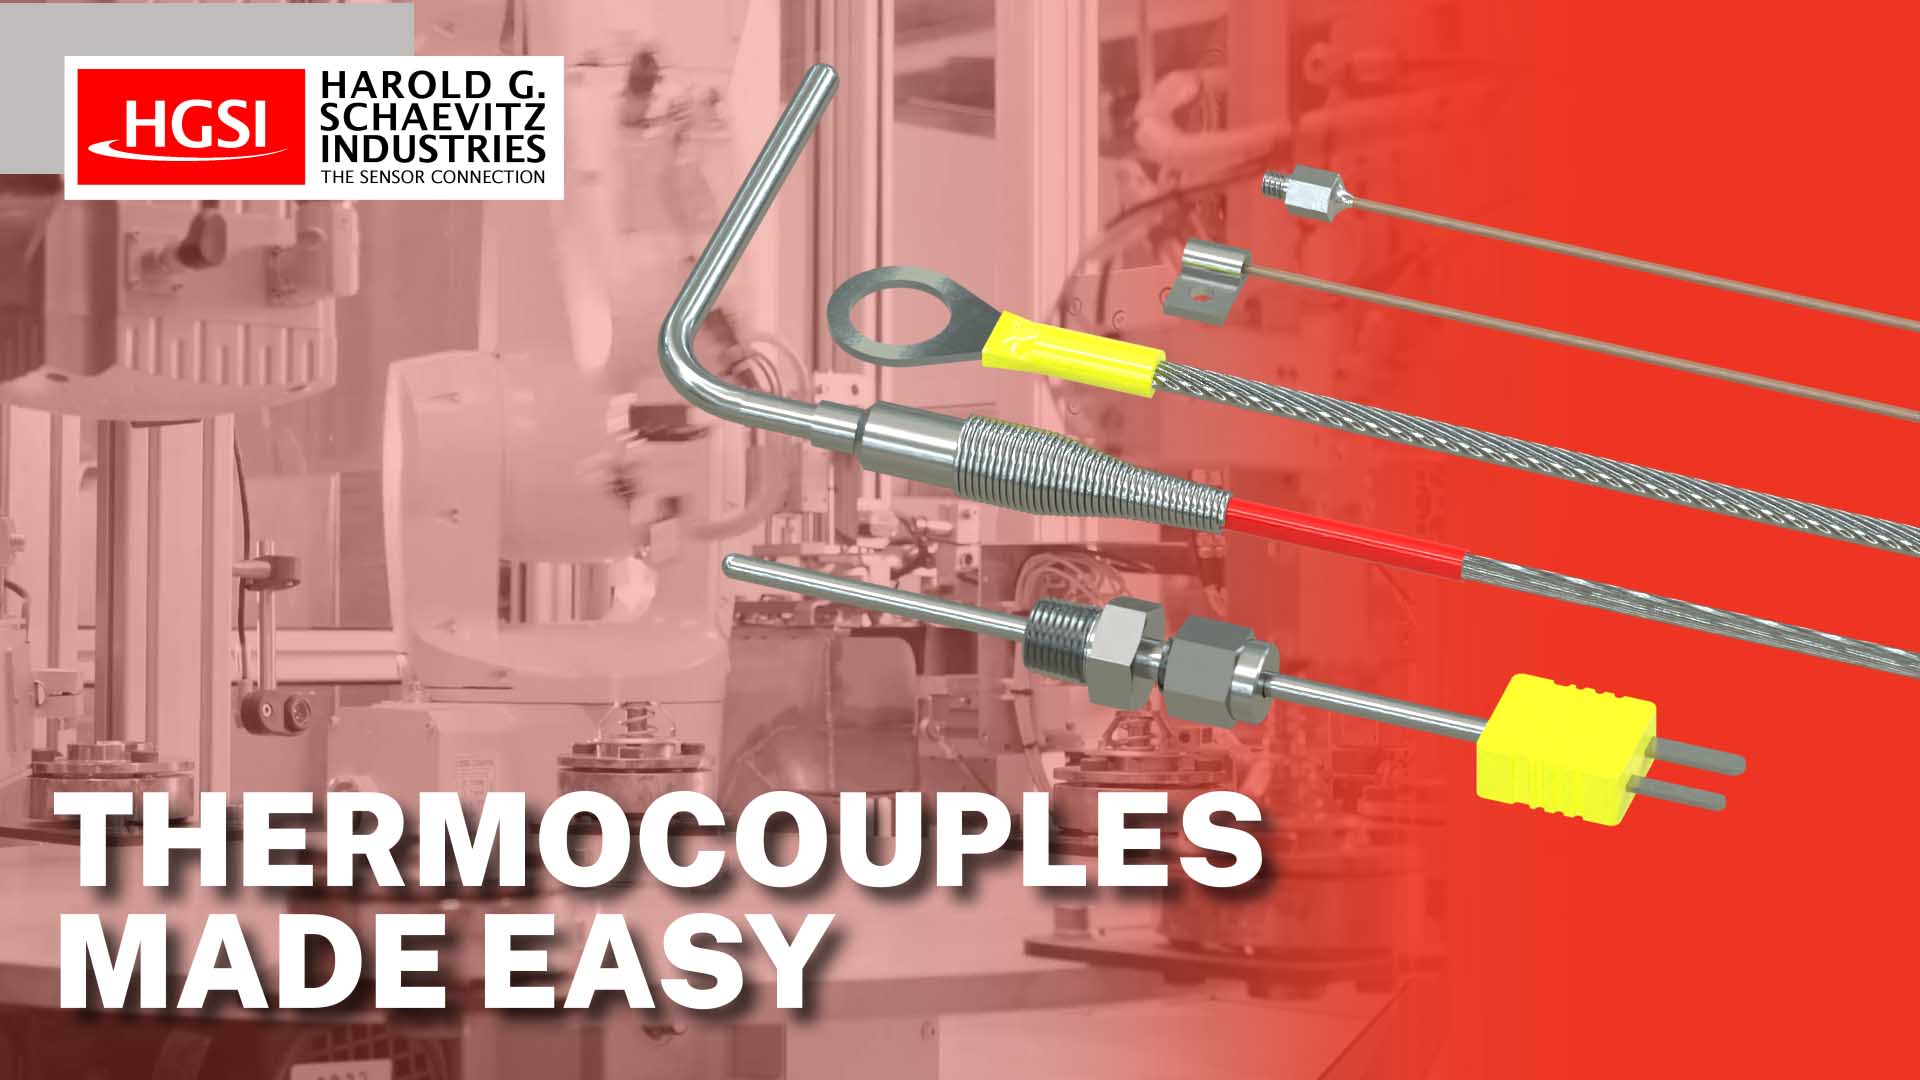 Thermocouples Made Easy. What is a Thermocouple?